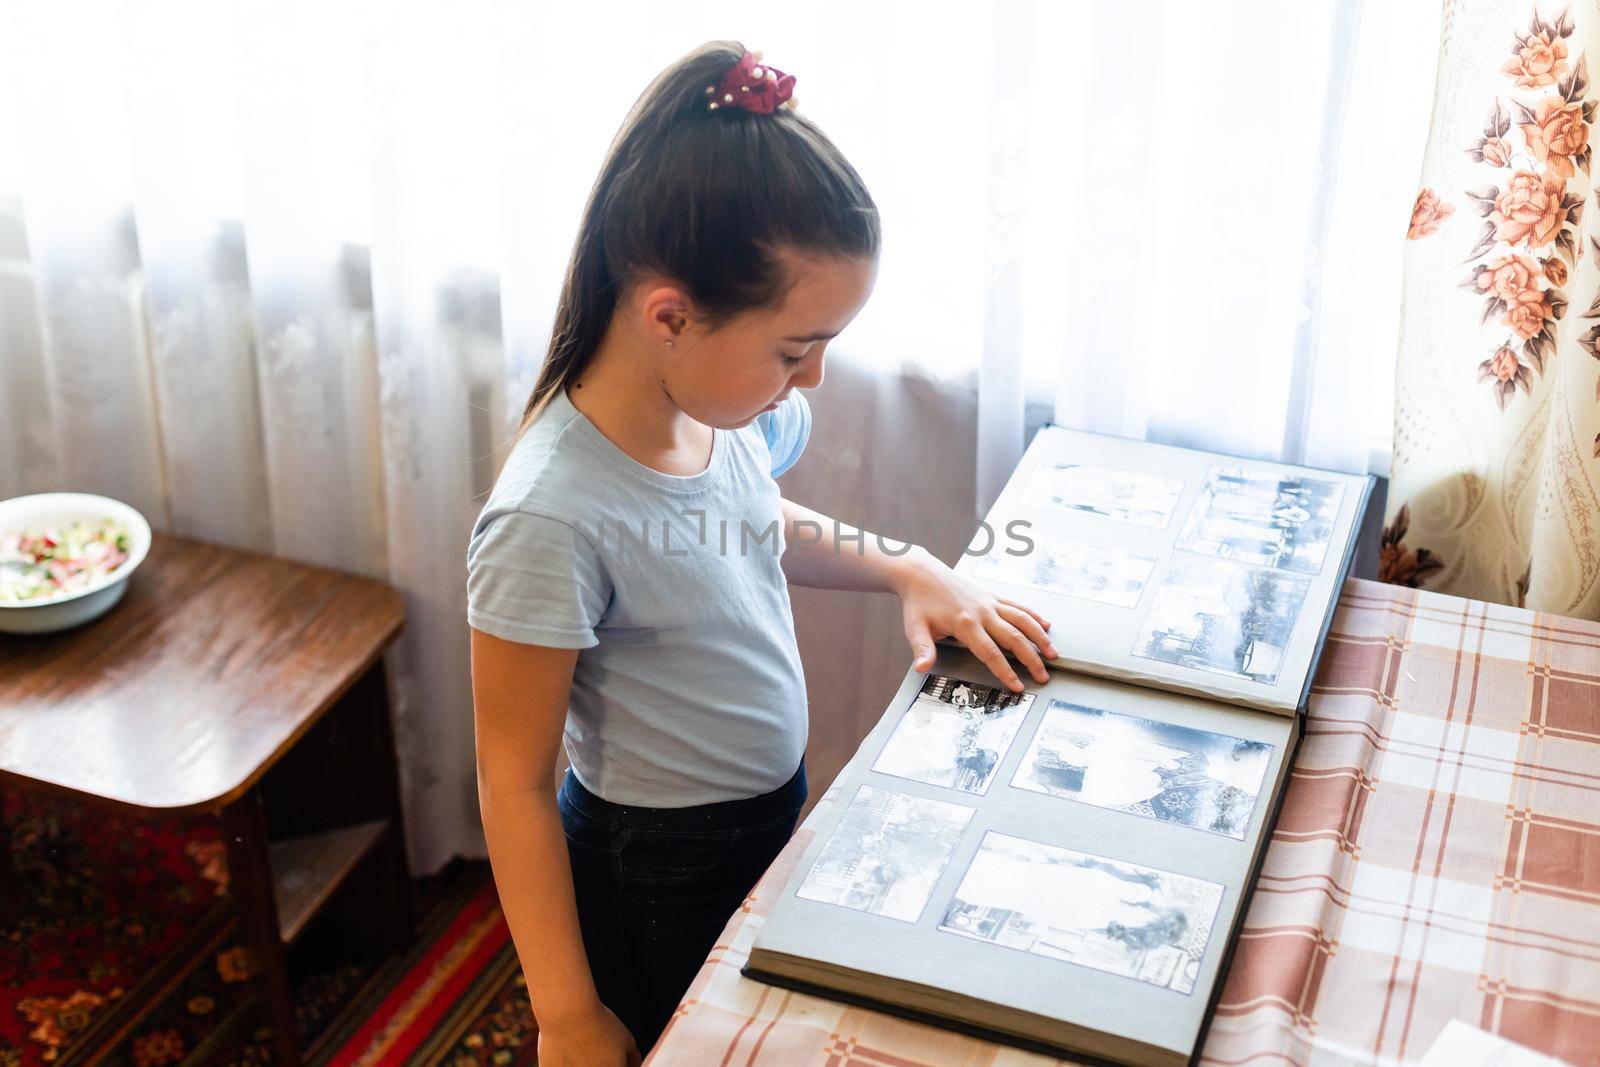 Adorable girl browsing an family album. Vintage style by Andelov13